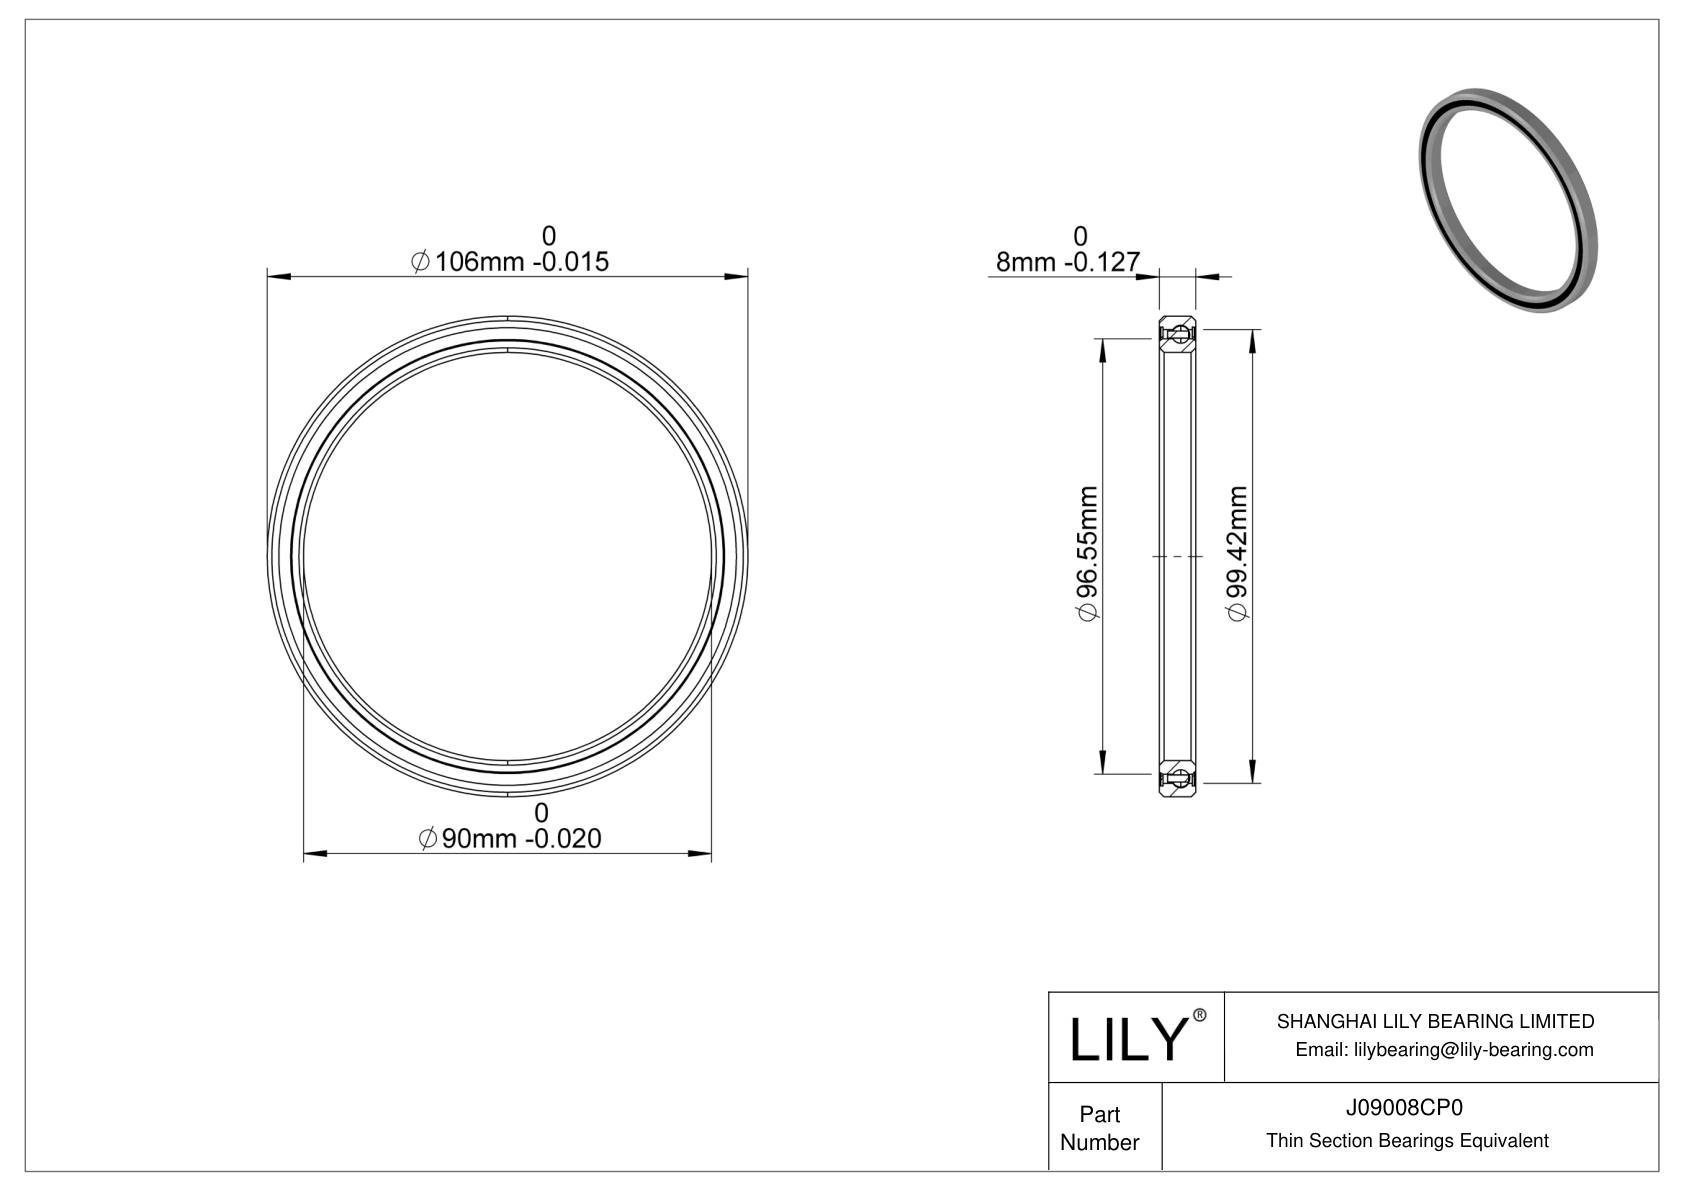 J09008CP0 Constant Section (CS) Bearings cad drawing